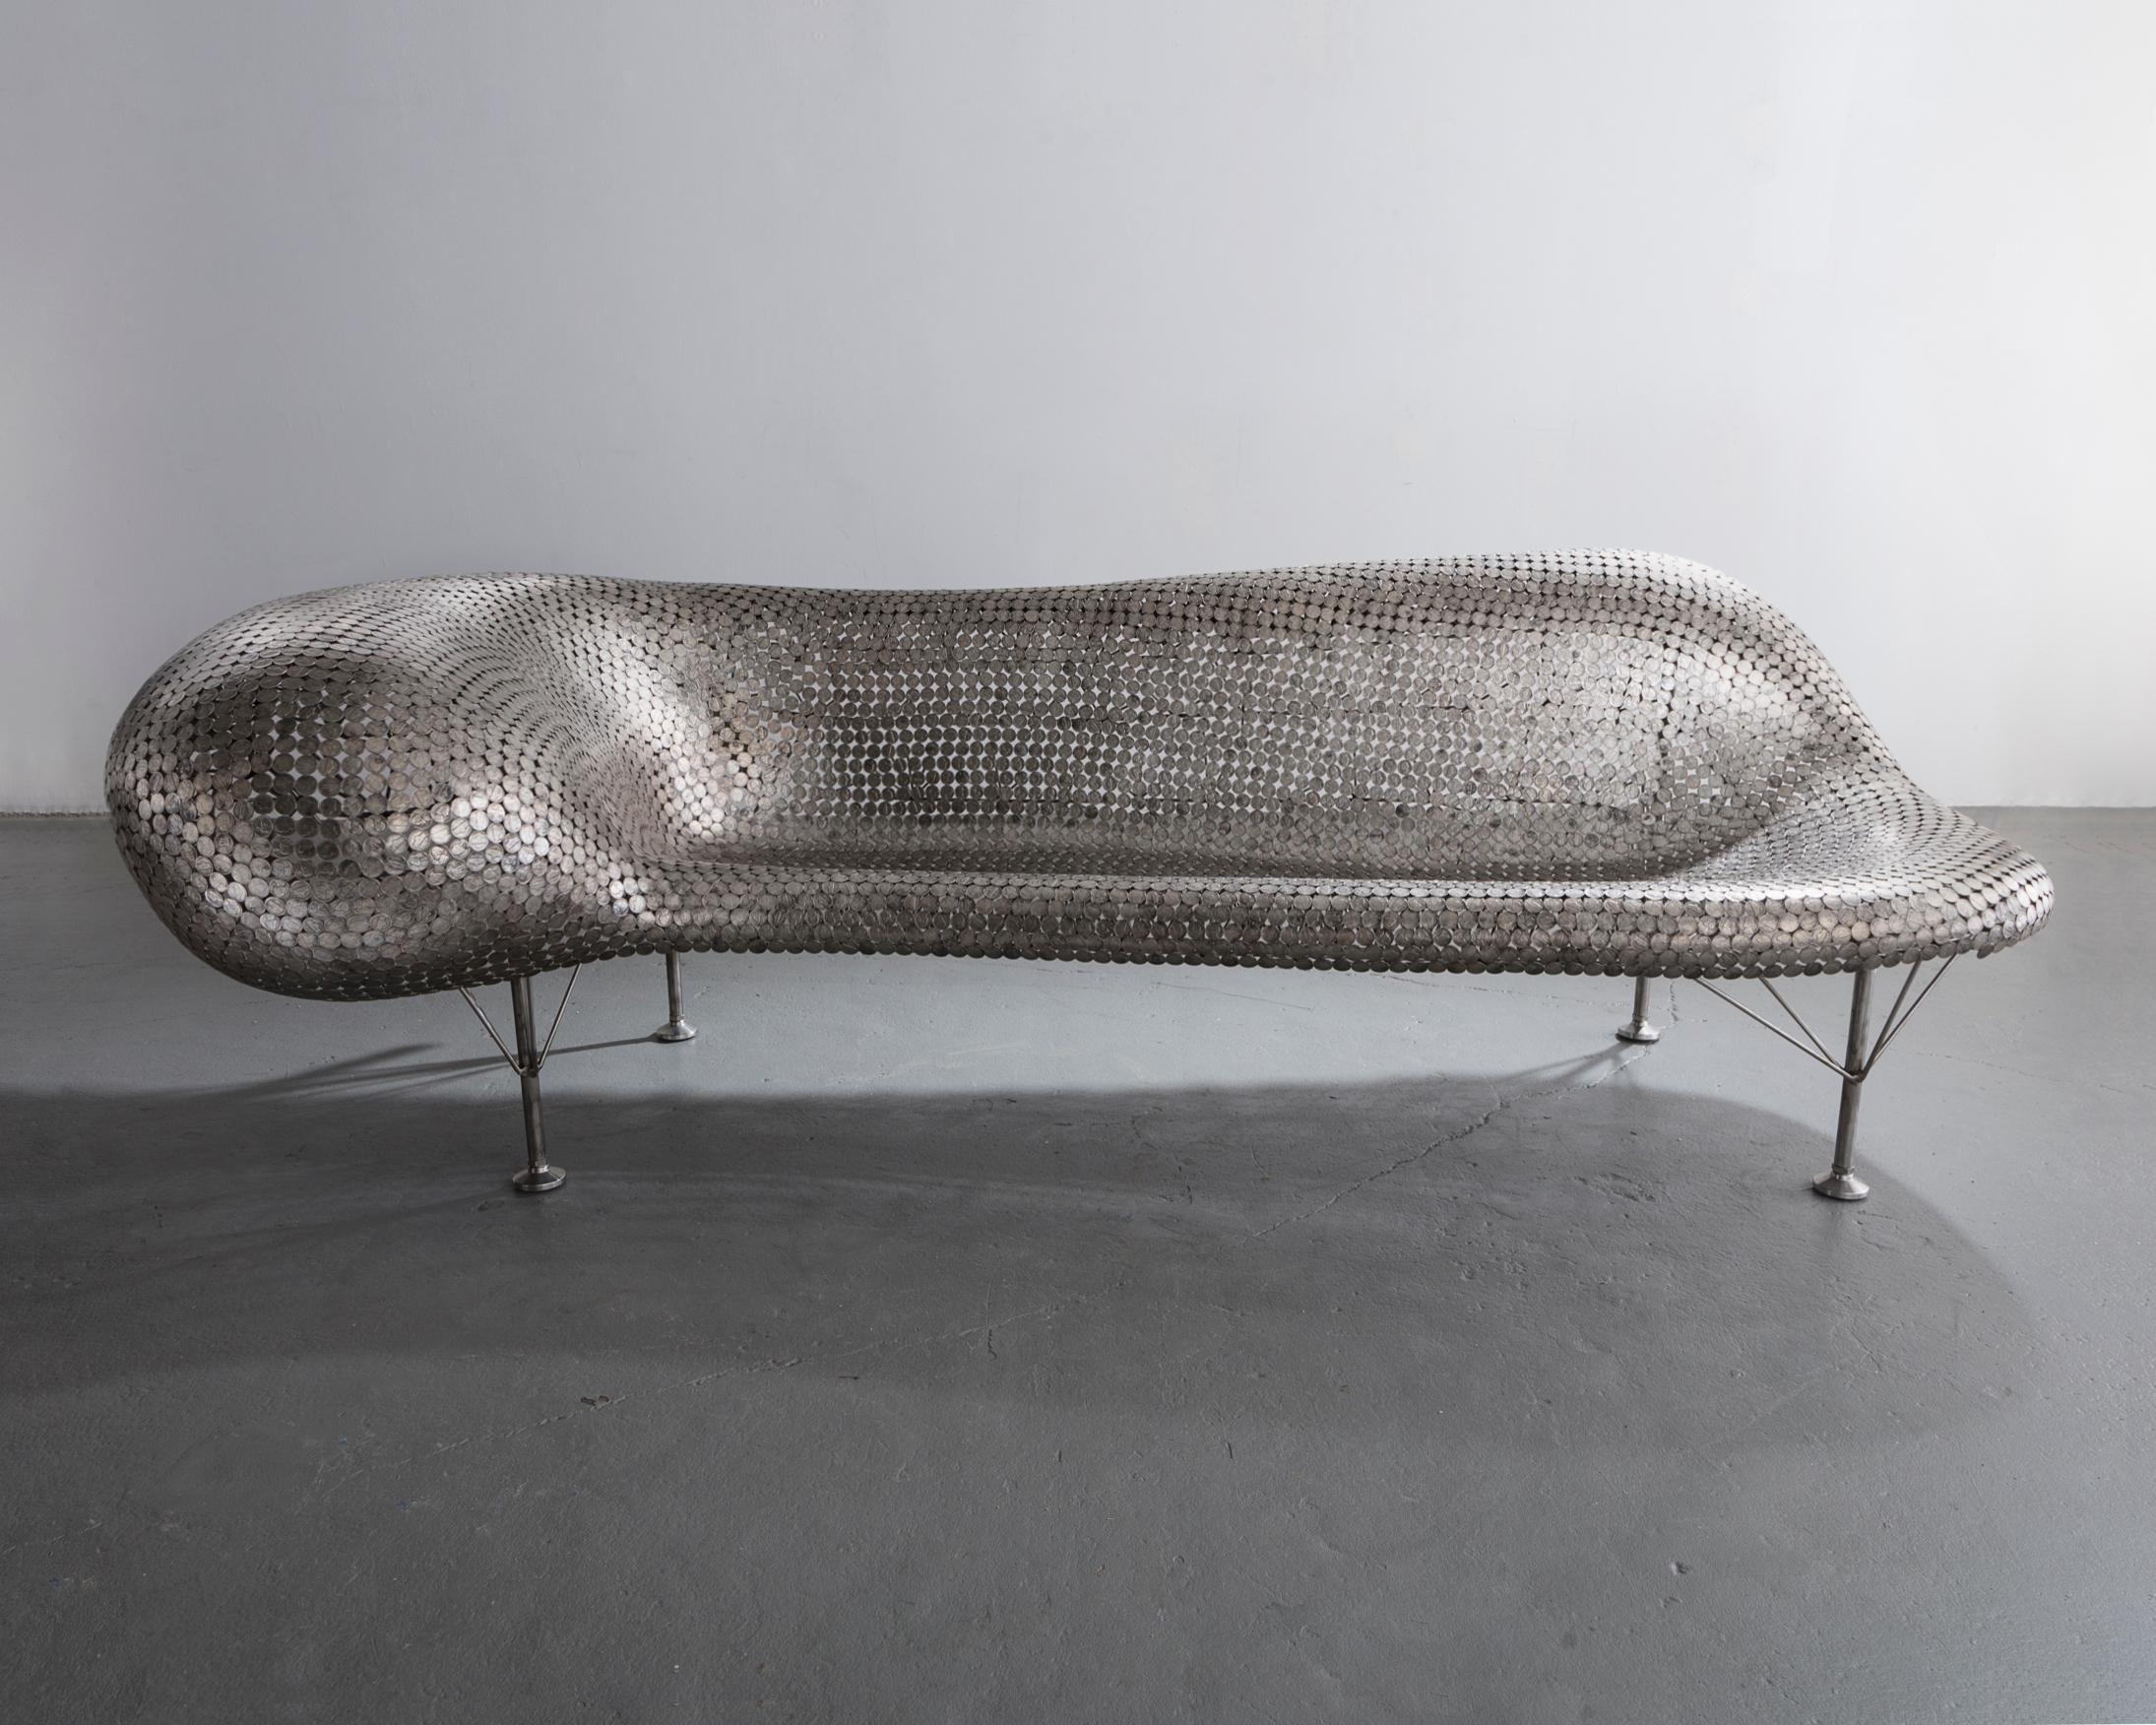 Available for custom order. Nickel couch in welded nickels and stainless steel. Made by Johnny Swing, USA. 